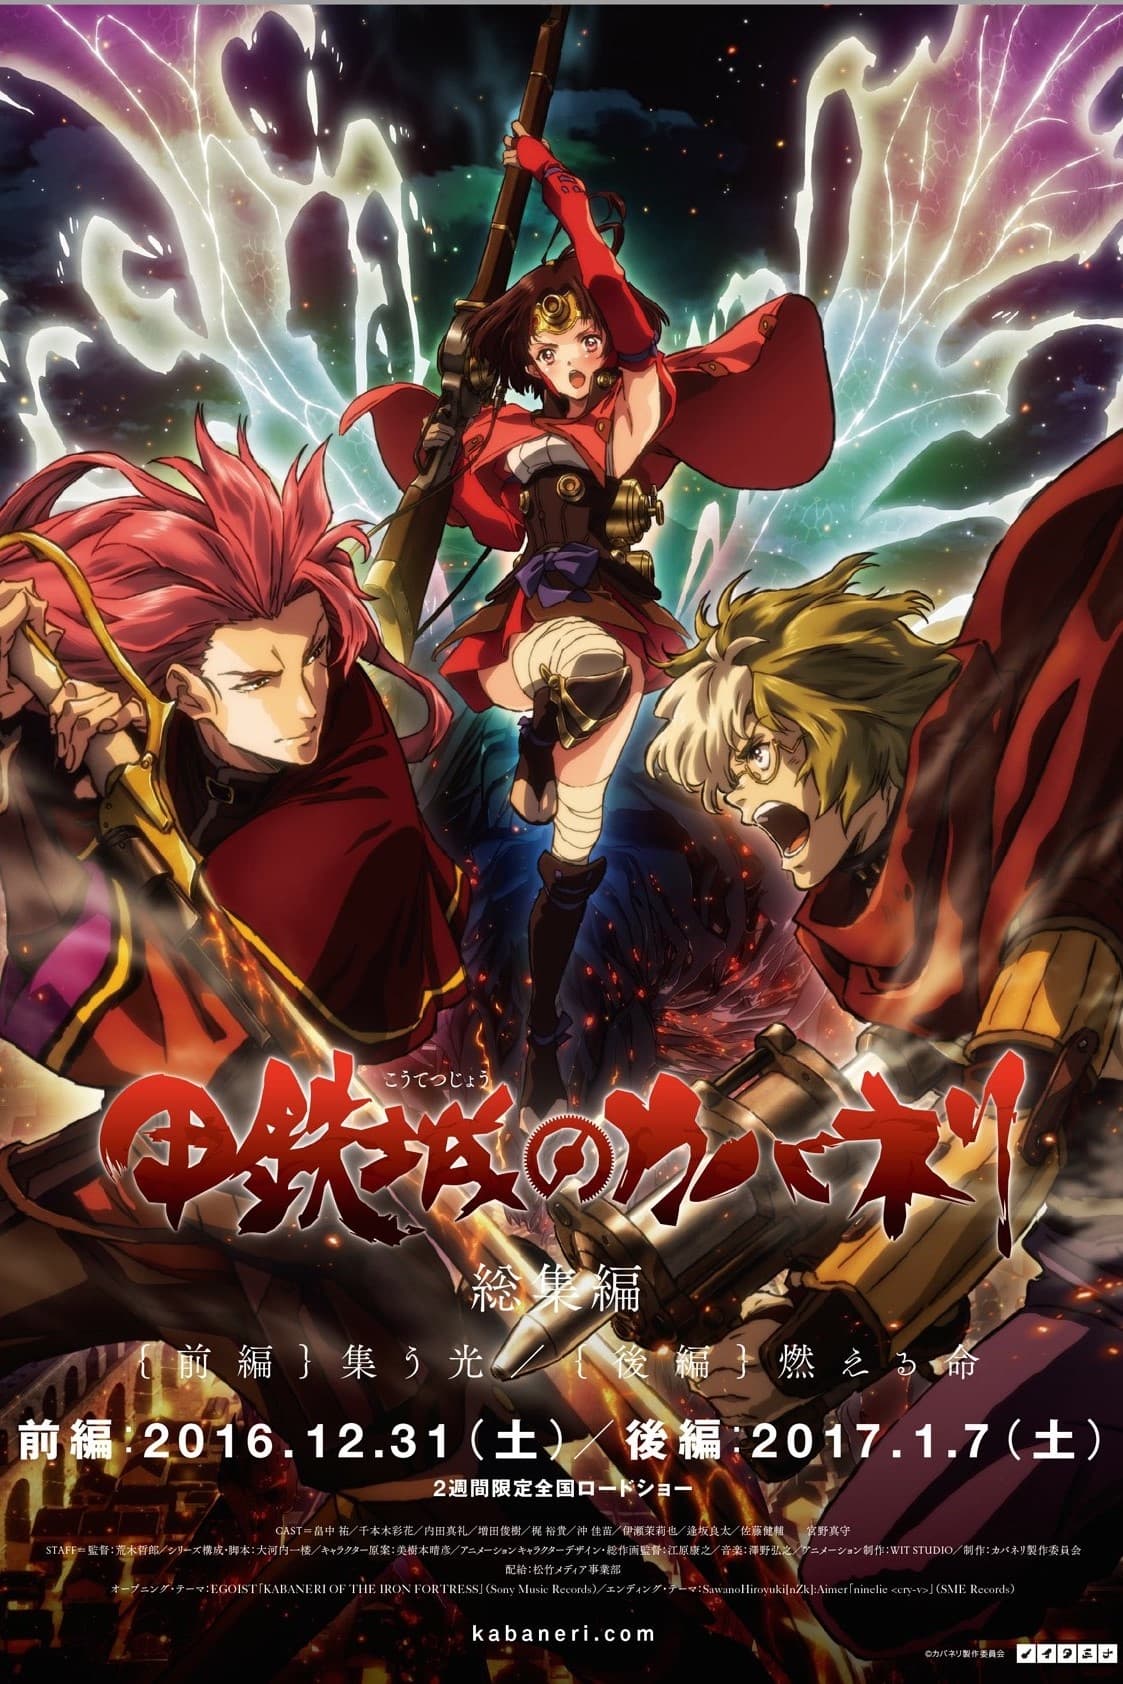 Kabaneri Of The Iron Fortress Part 2 Life That Burns